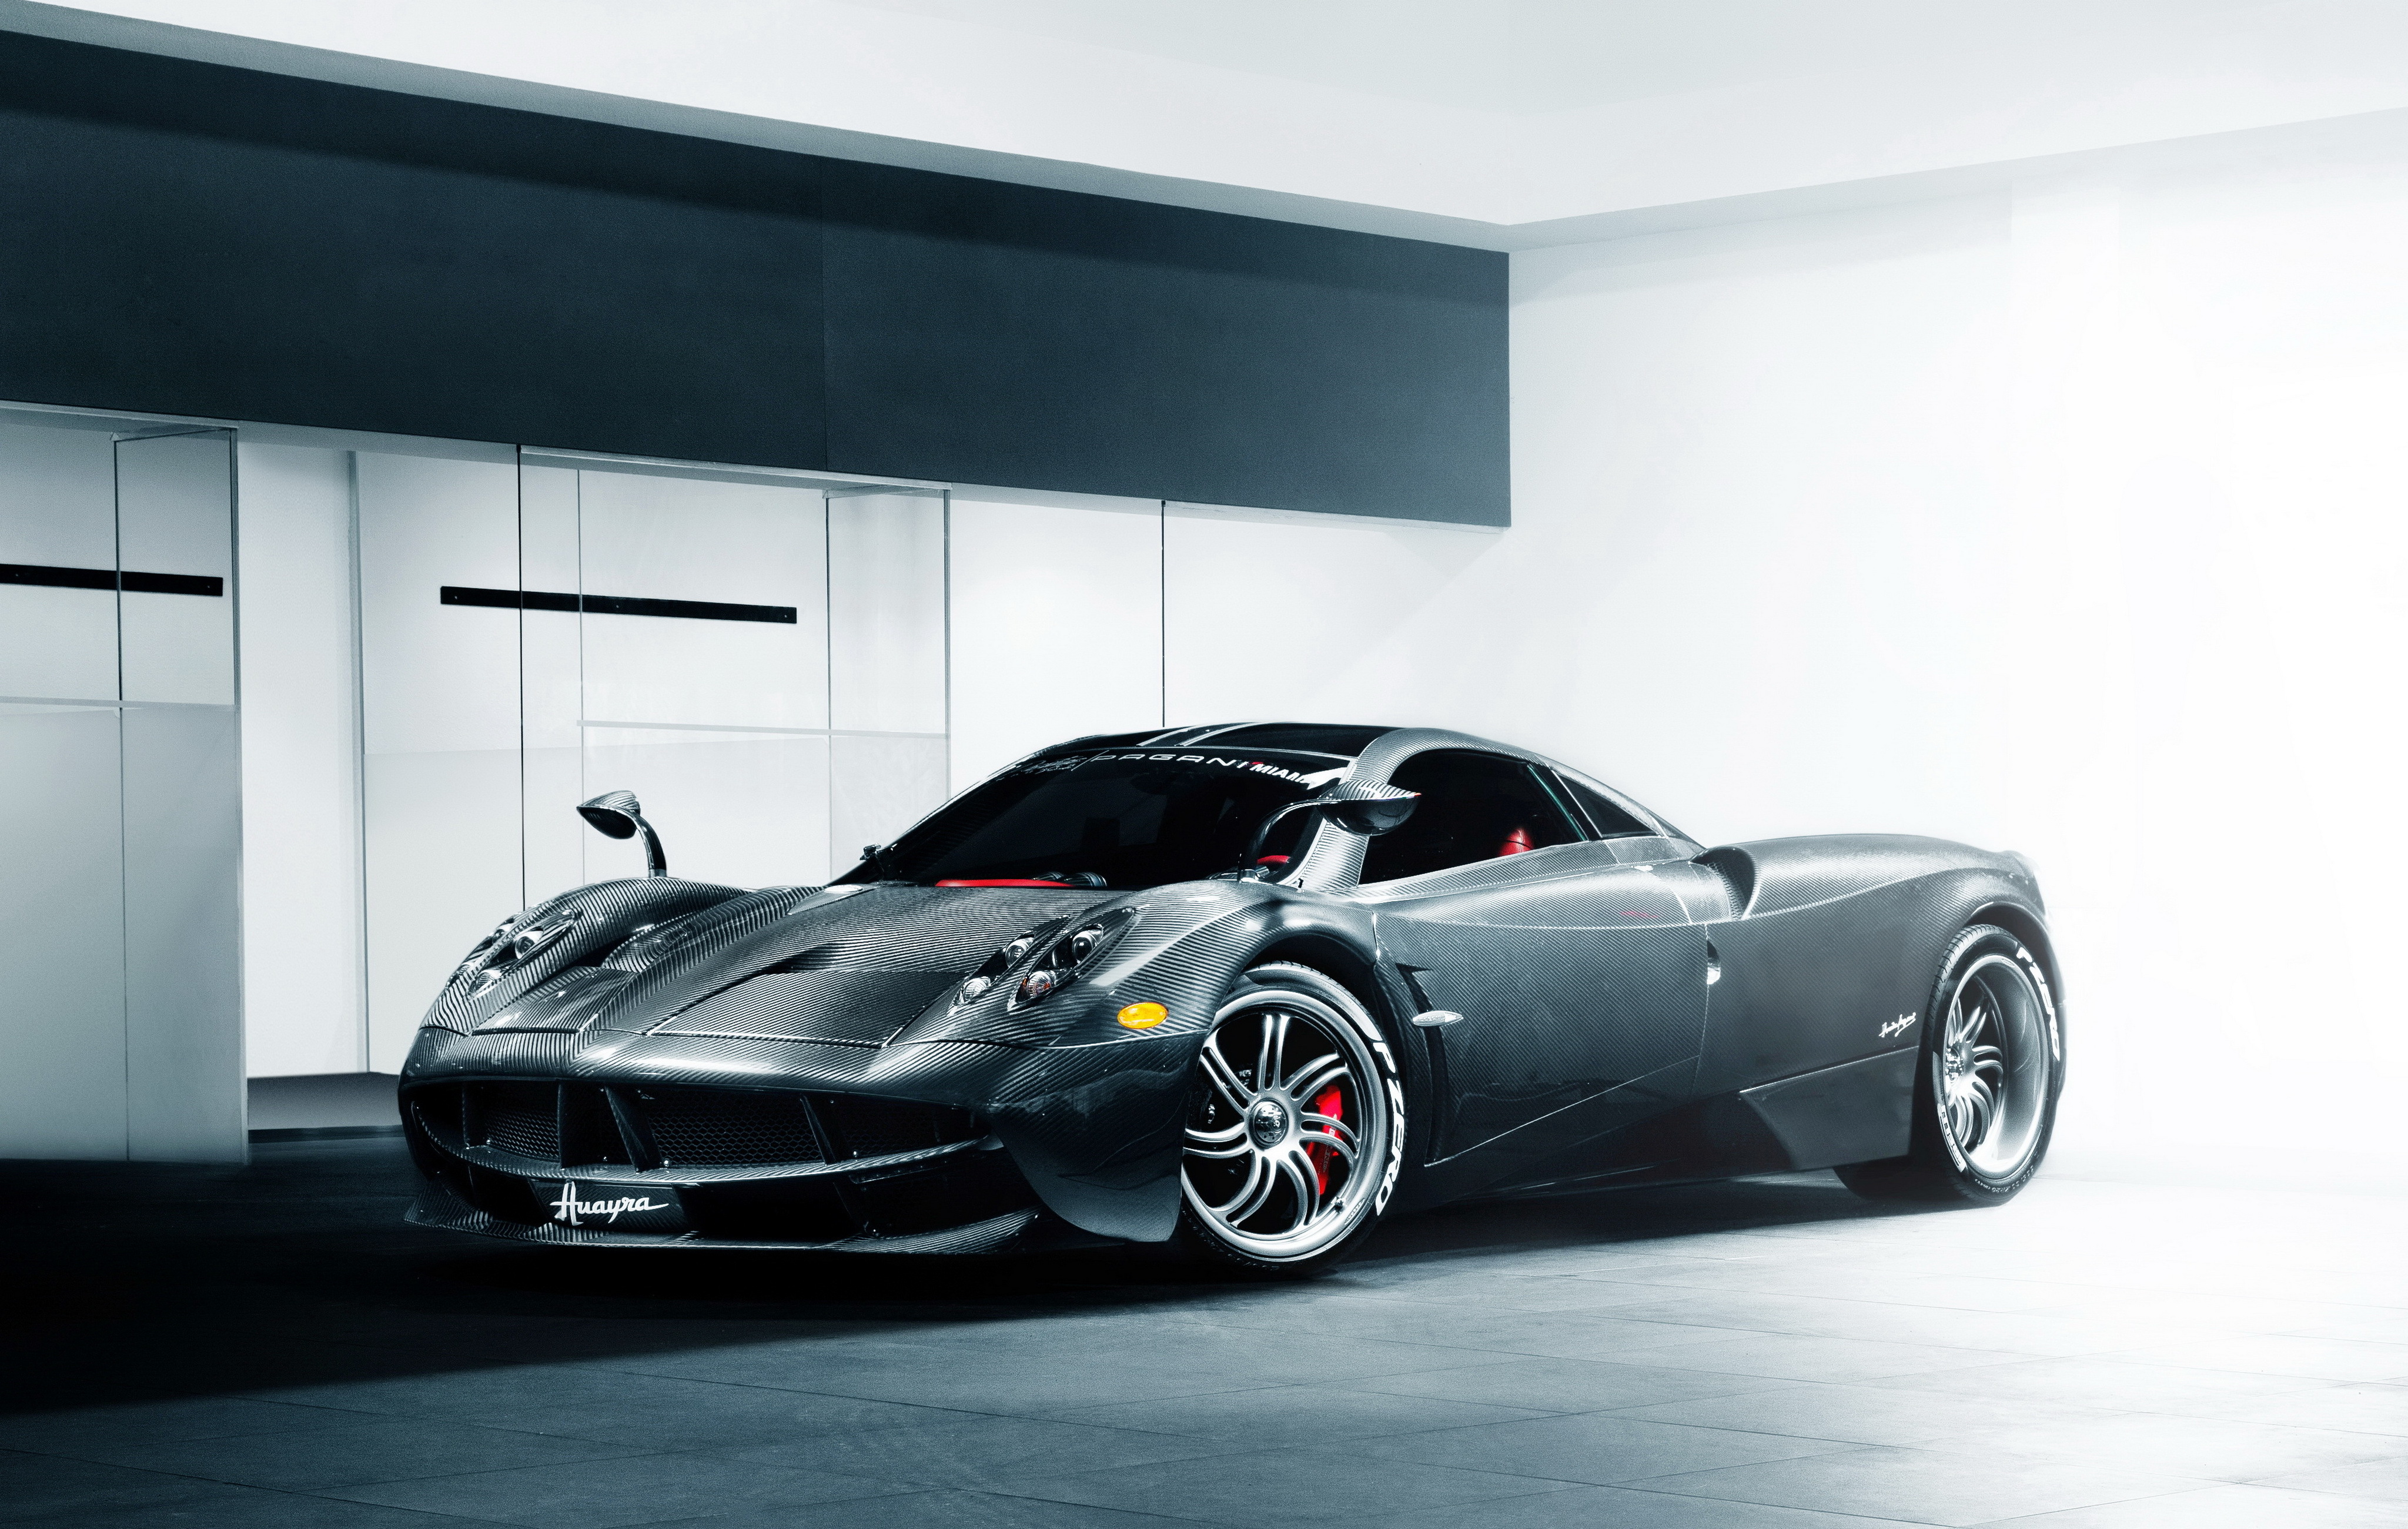 137840 download wallpaper pagani, cars, side view, huayra screensavers and pictures for free